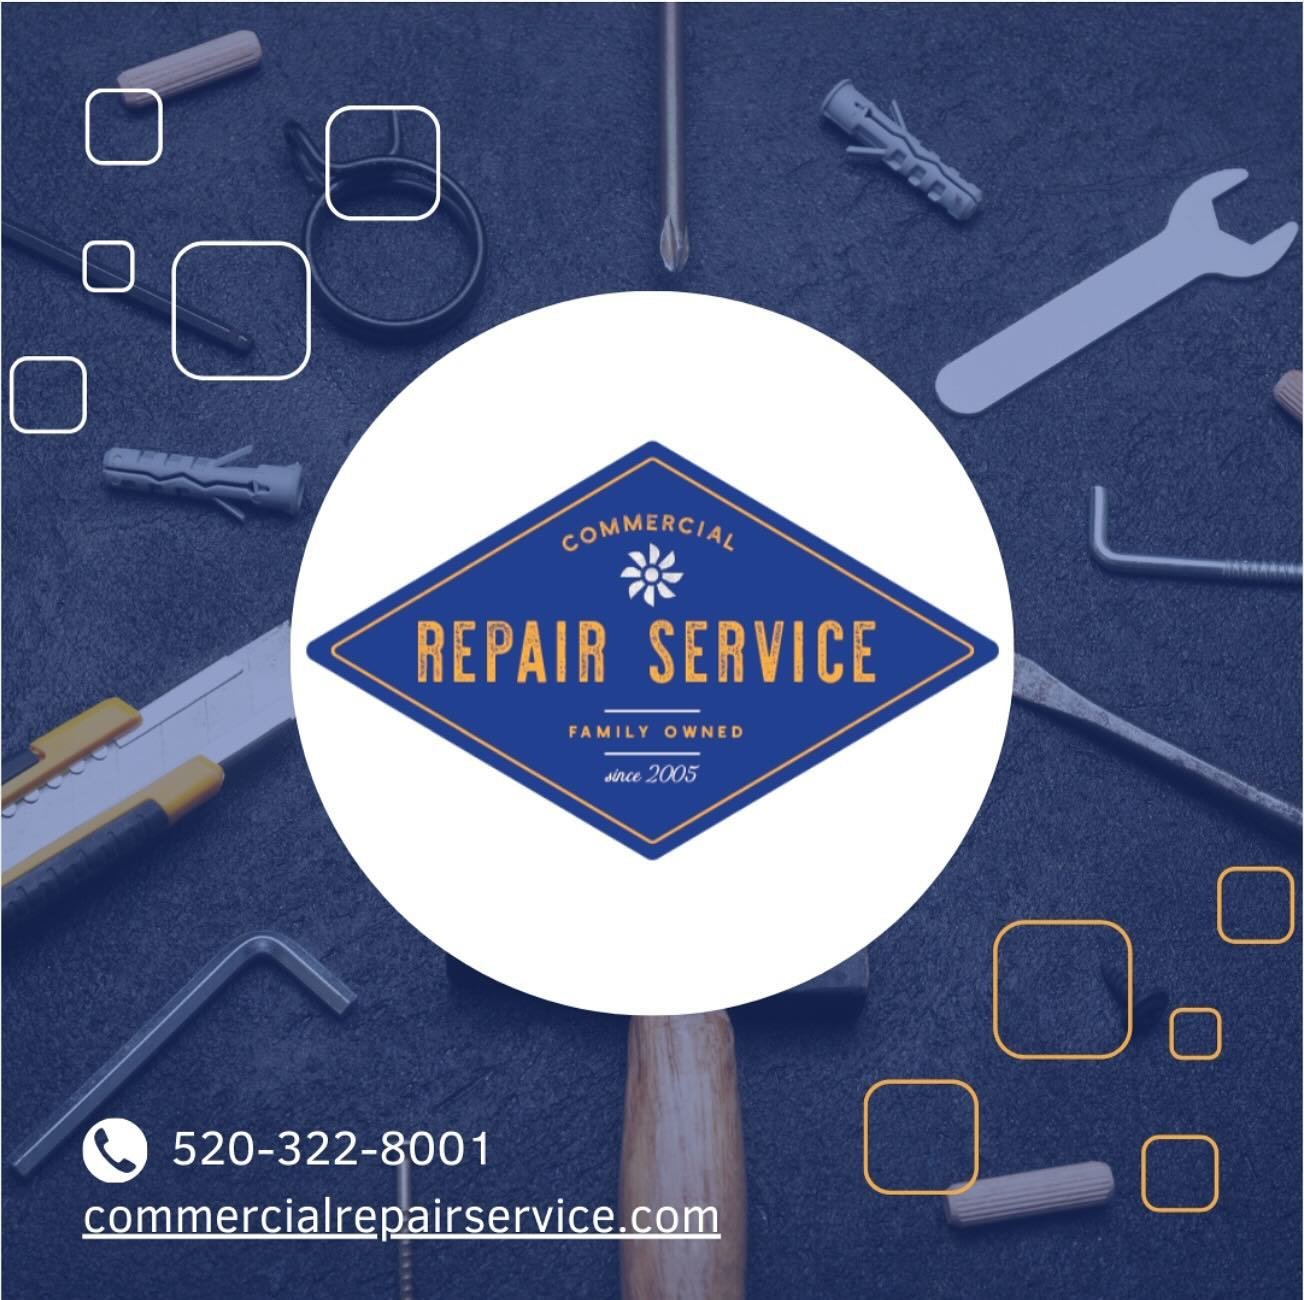 Don&rsquo;t wait until there is a problem! Reach out to us today and let&rsquo;s make sure your ongoing building, office, retail, and house maintenance is up to date. 

We&rsquo;re here to ensure your needs are met promptly and professionally.

Call 